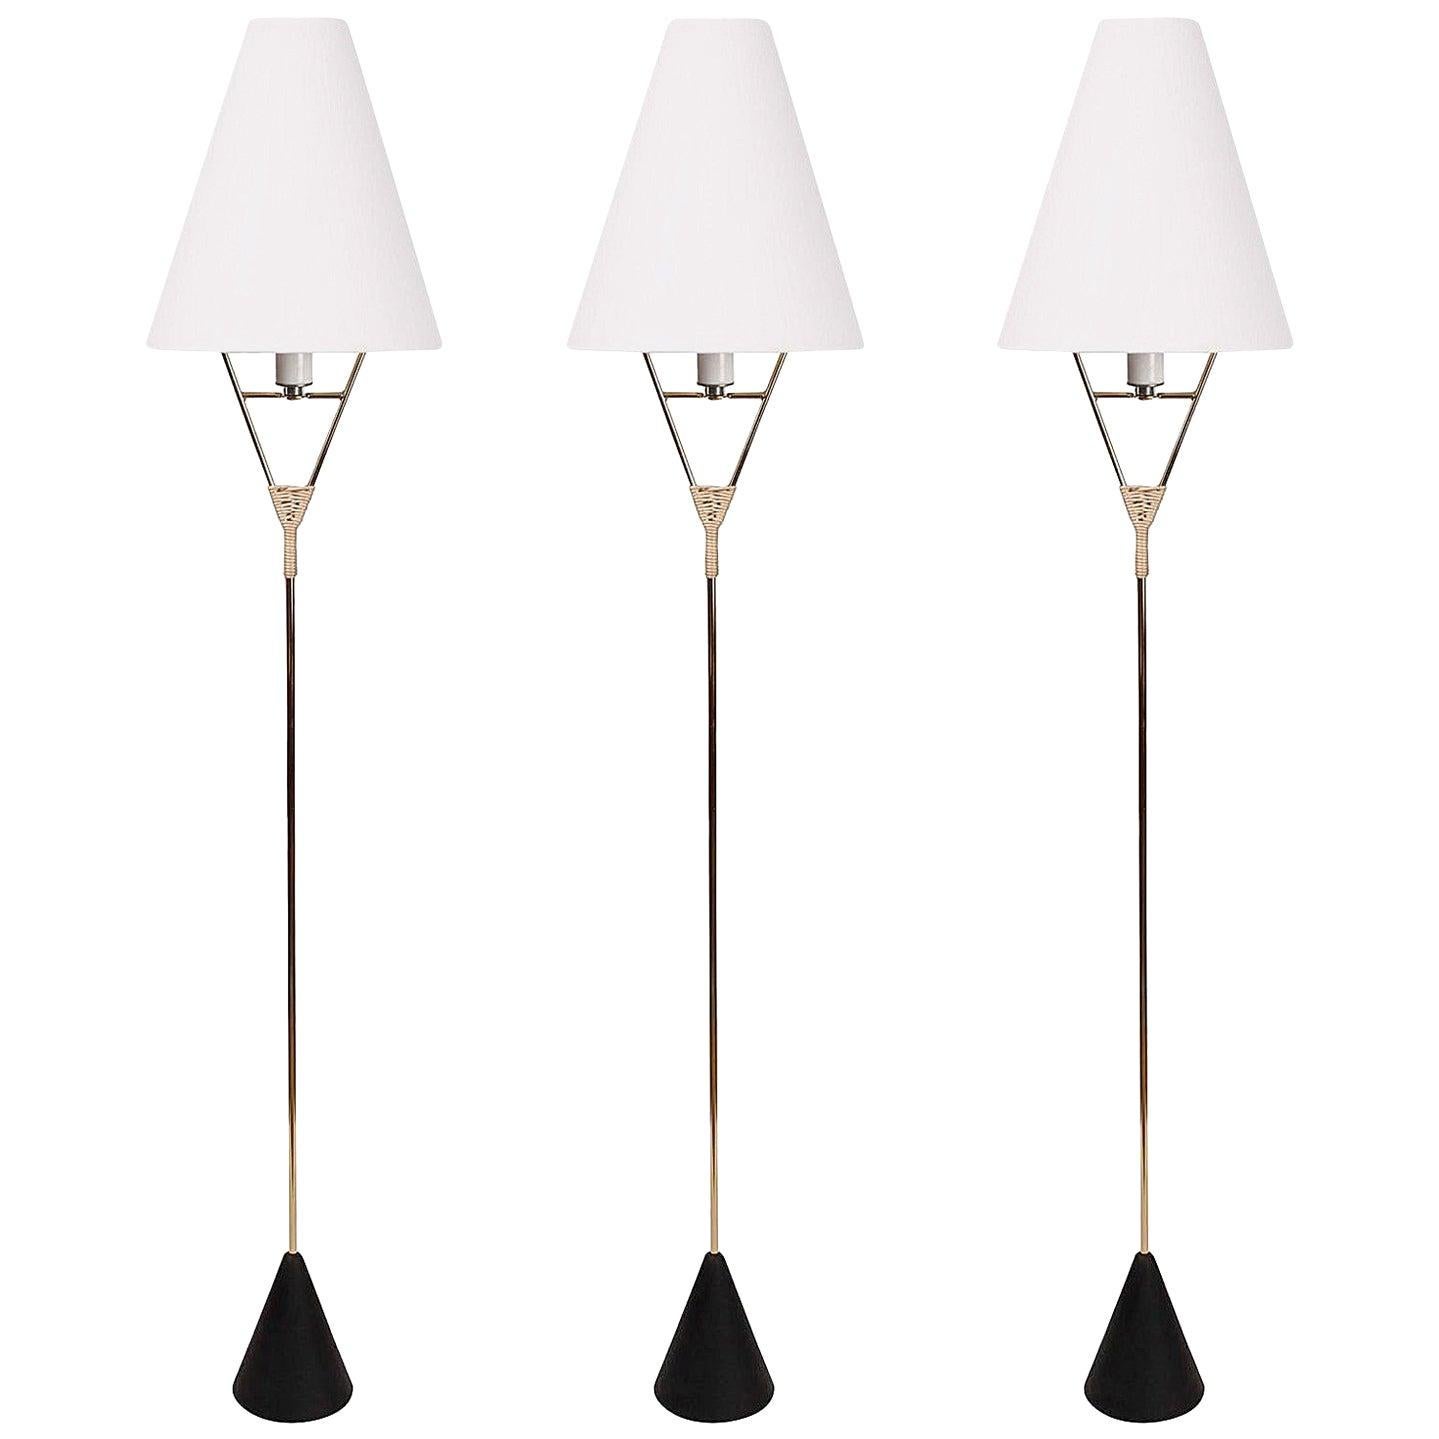 Pair of Carl Auböck Vice Versa Floor Lamps In New Condition For Sale In Glendale, CA